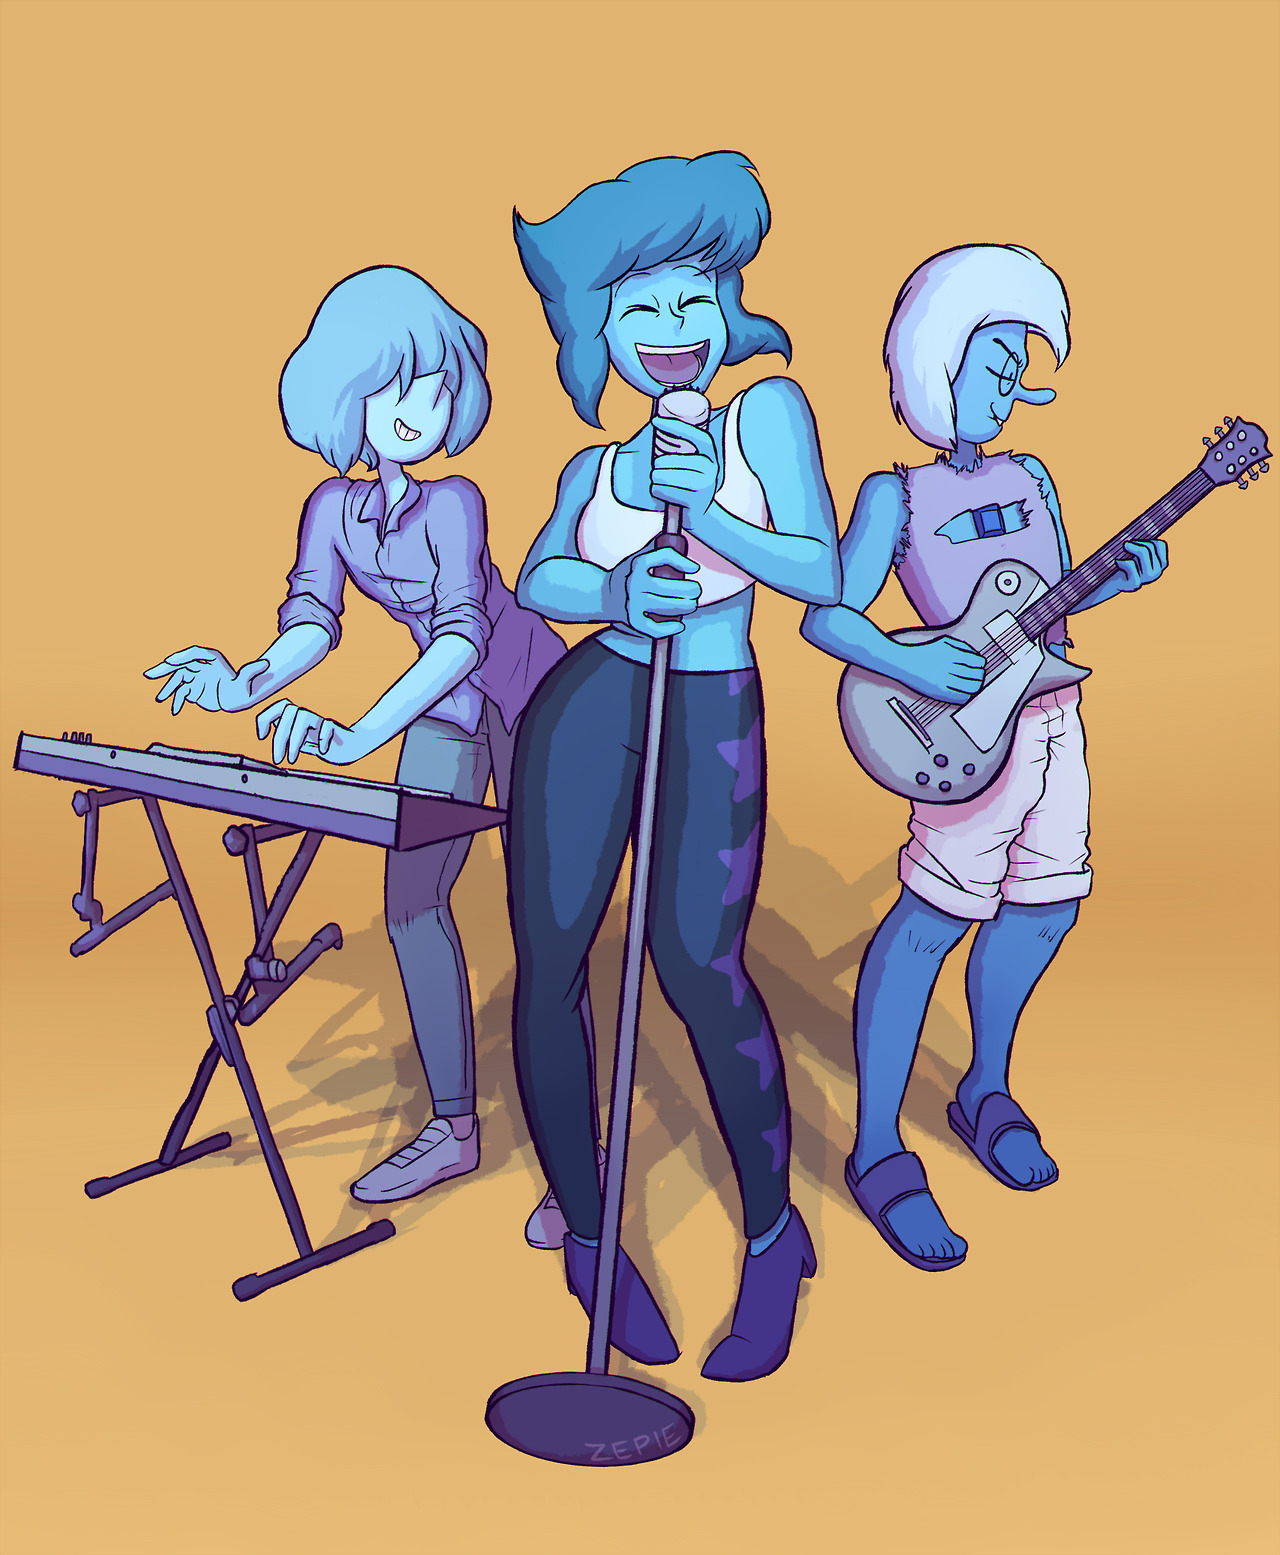 Blue Gem Group (ﾉ◕ヮ◕)ﾉ*:･ﾟ✧ | commissioned by @koreankitkat |